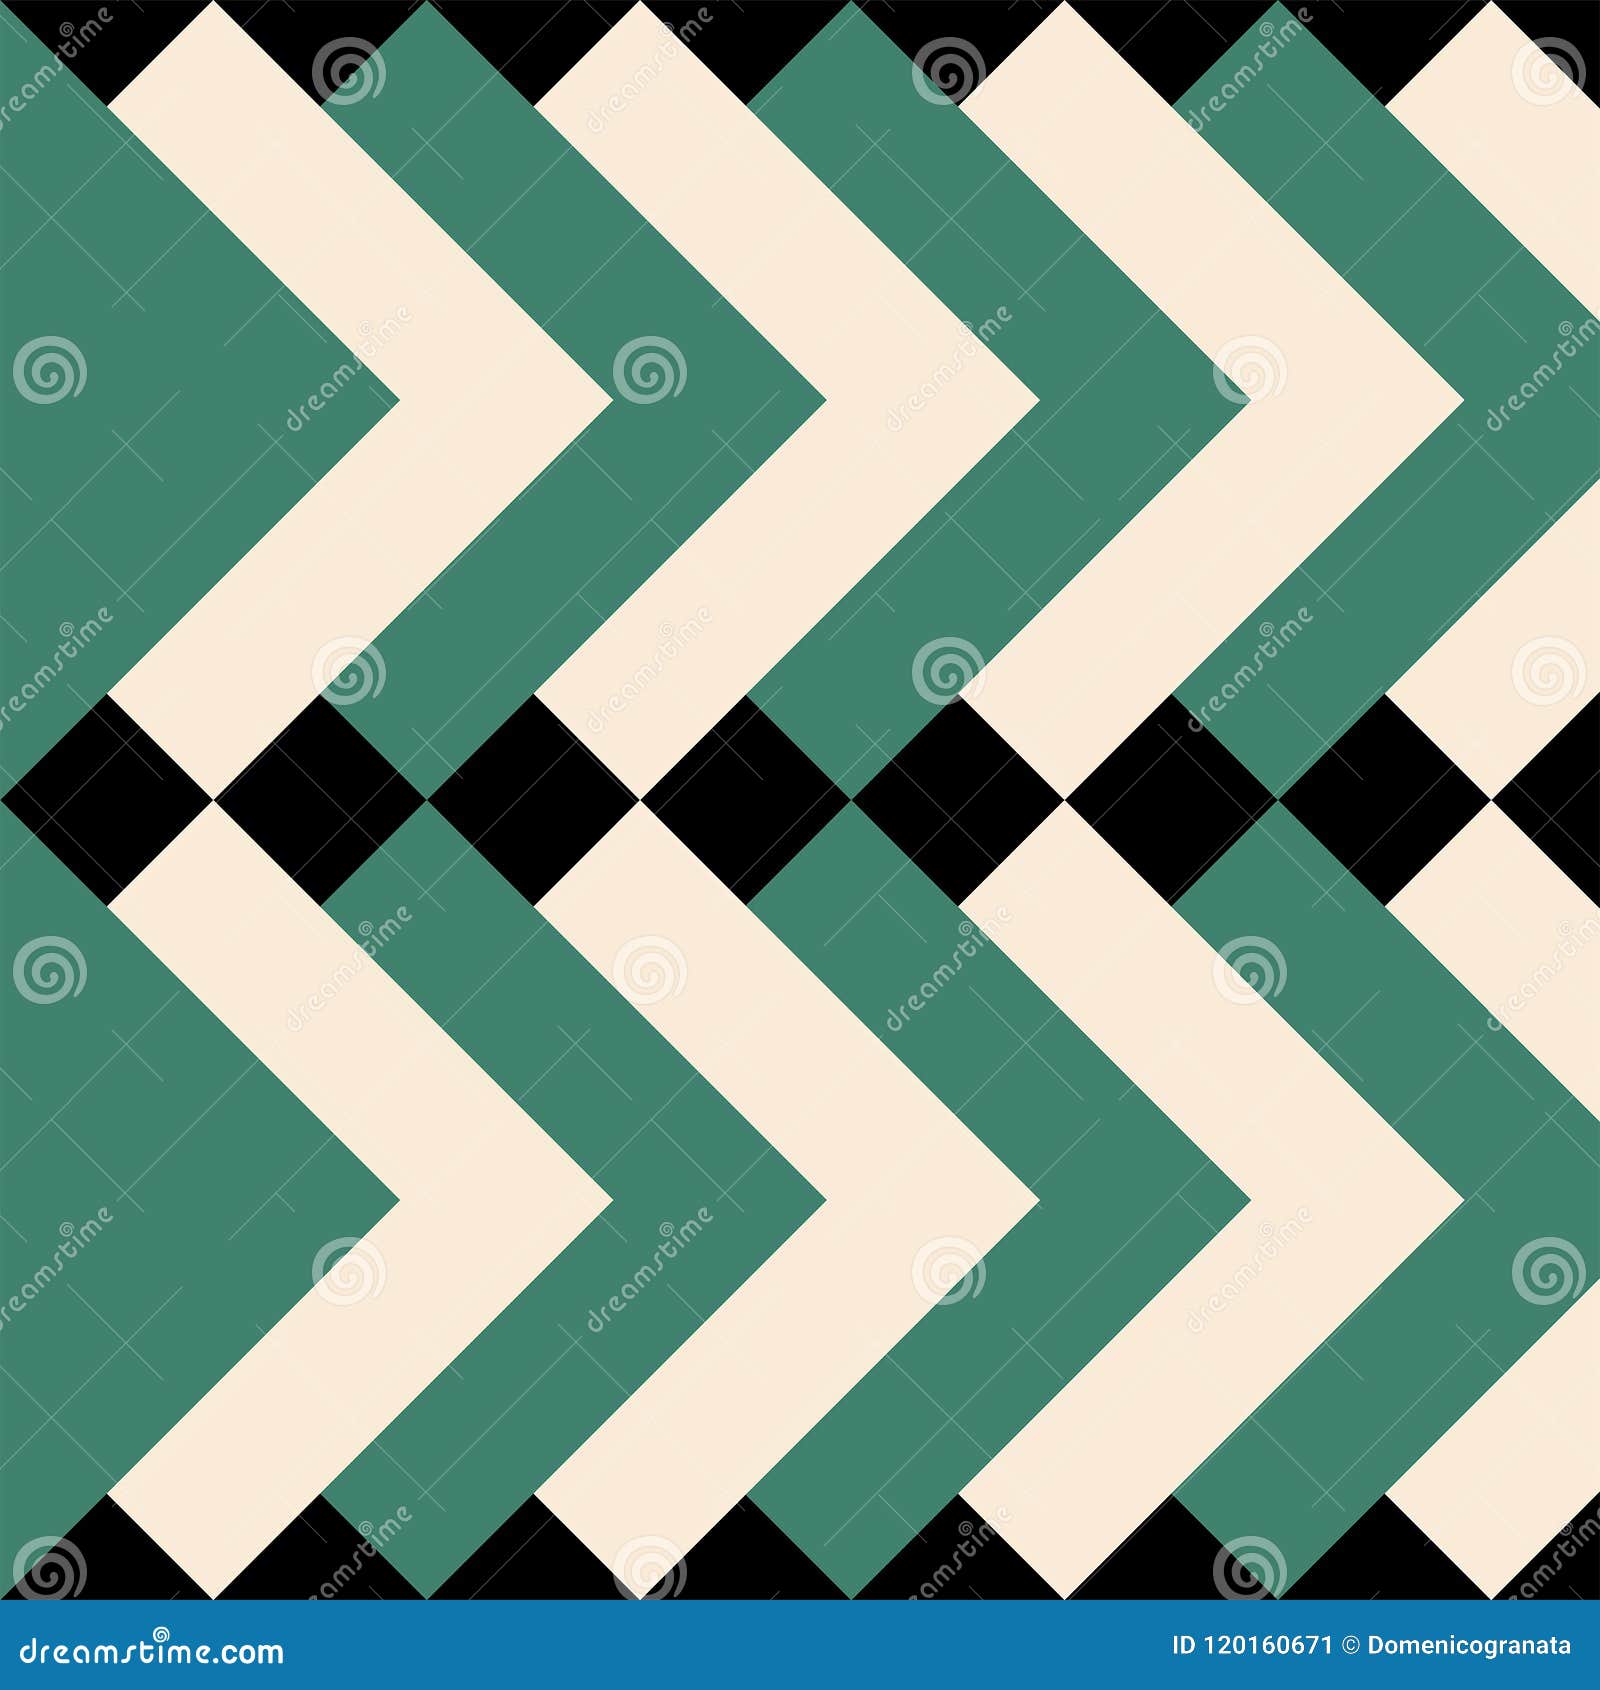 geometric pattern with green and cream squares